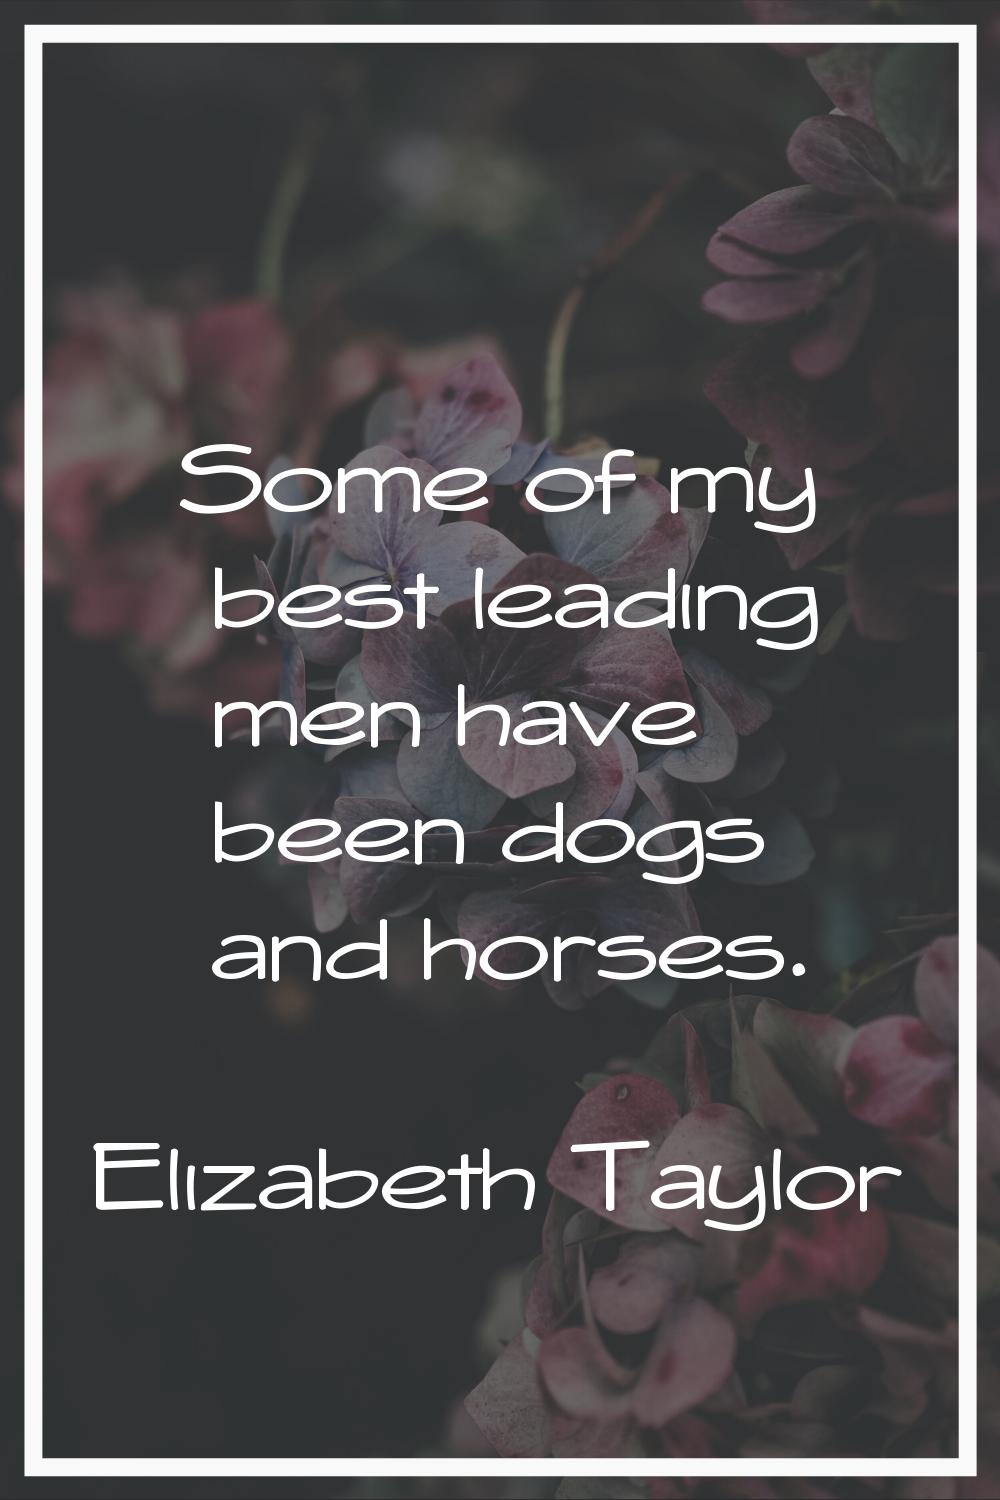 Some of my best leading men have been dogs and horses.